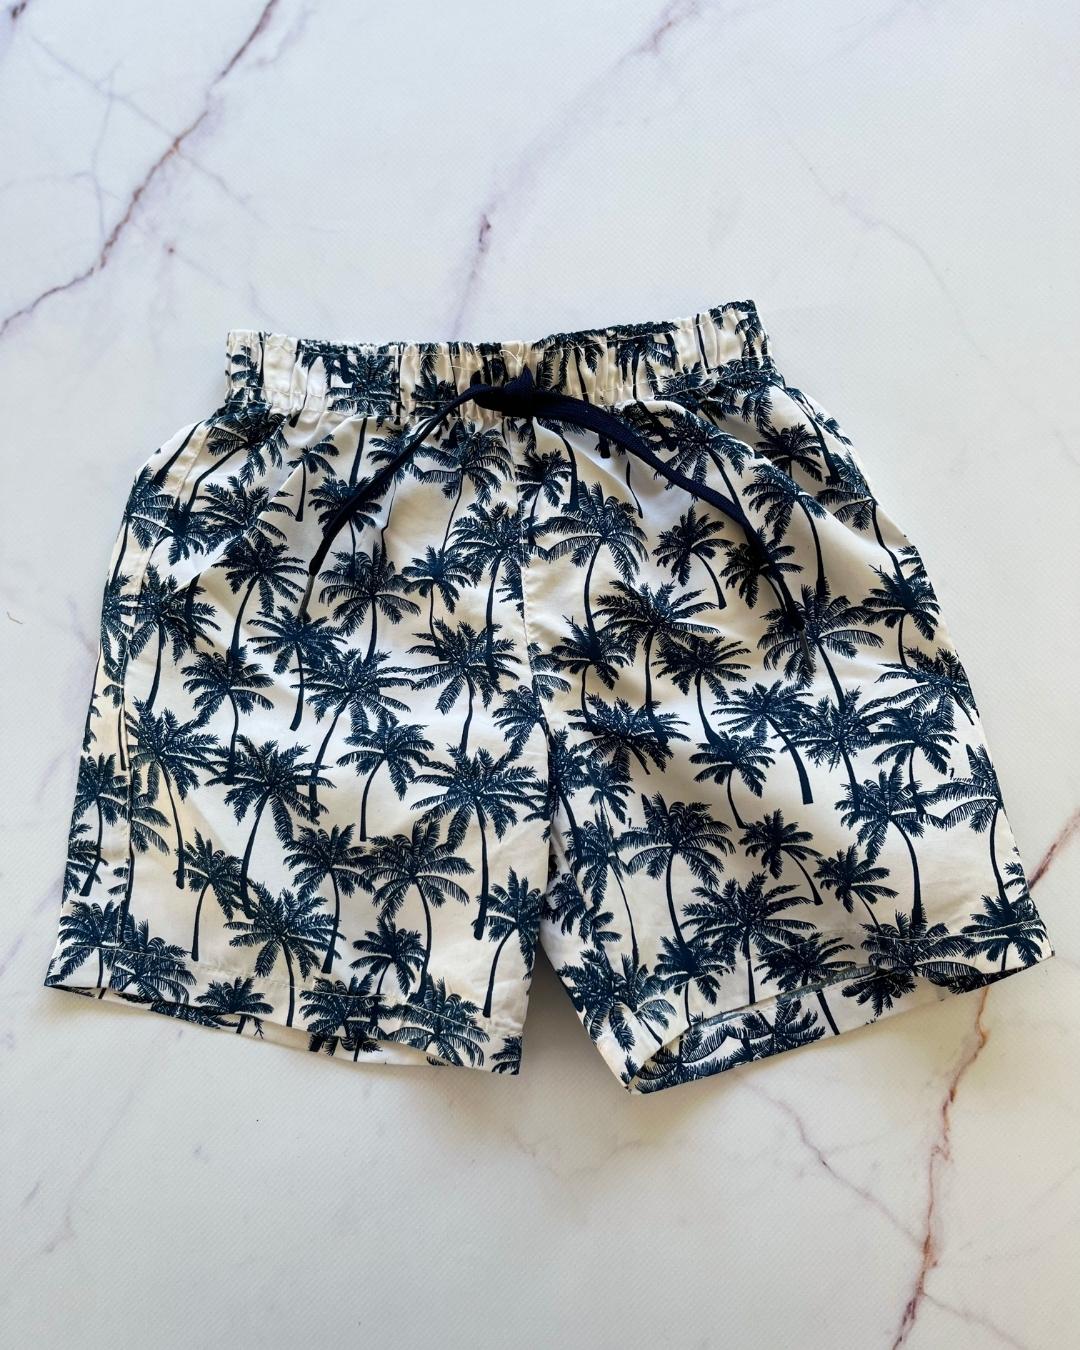 Checky white board shorts and blue palms 4/5Y – Nearly New Kids